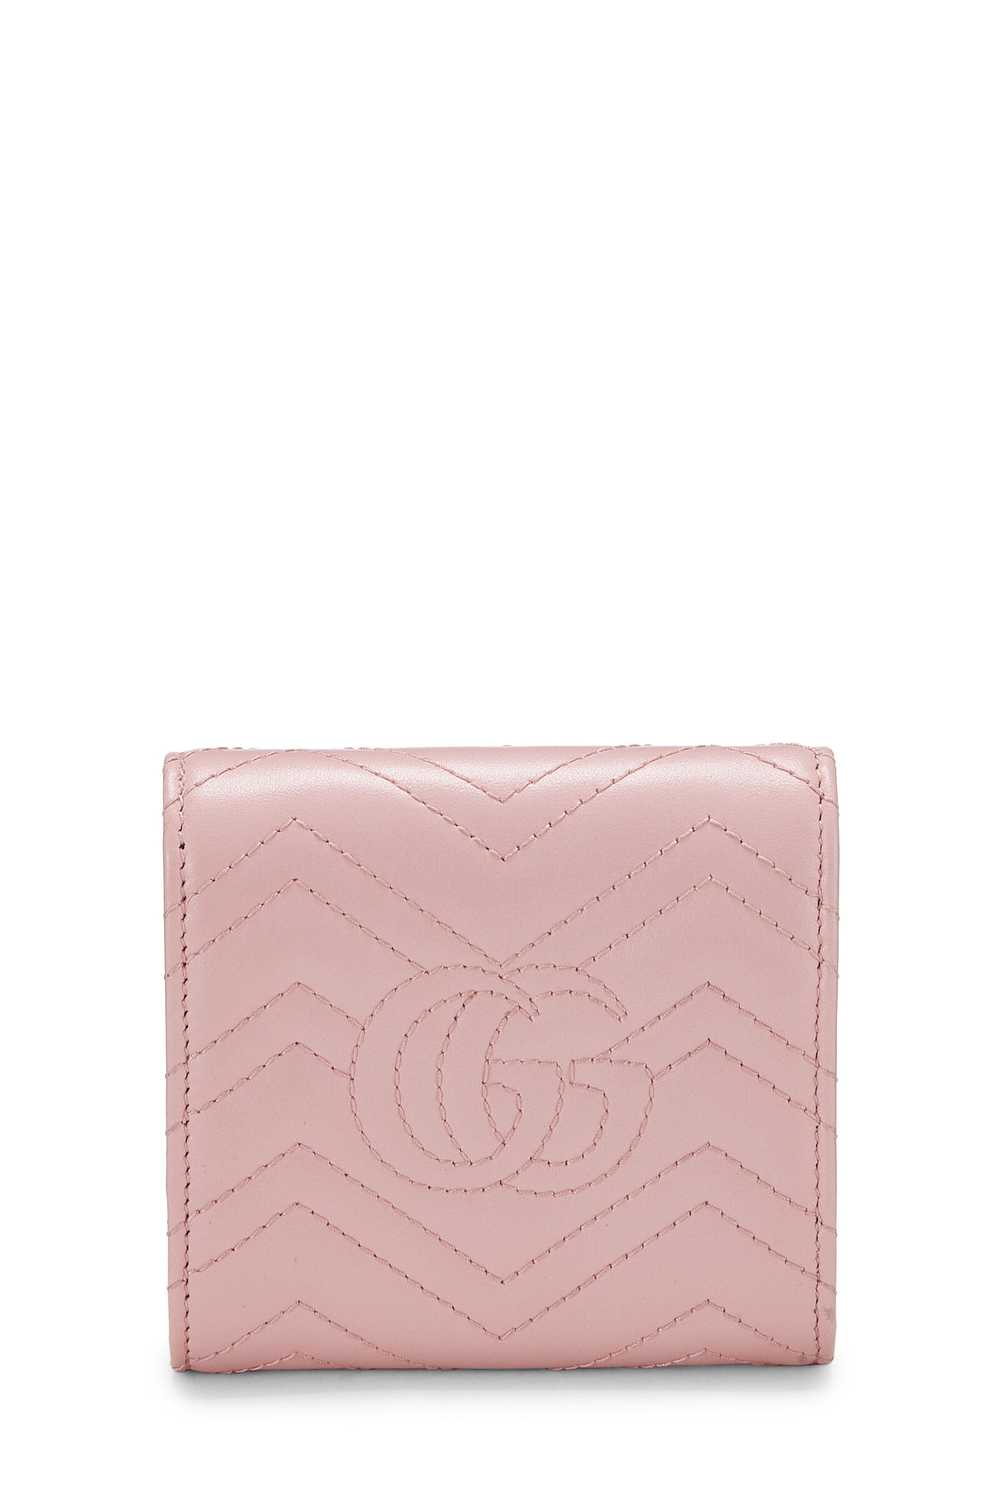 Pink Leather GG Marmont Card Case - image 3